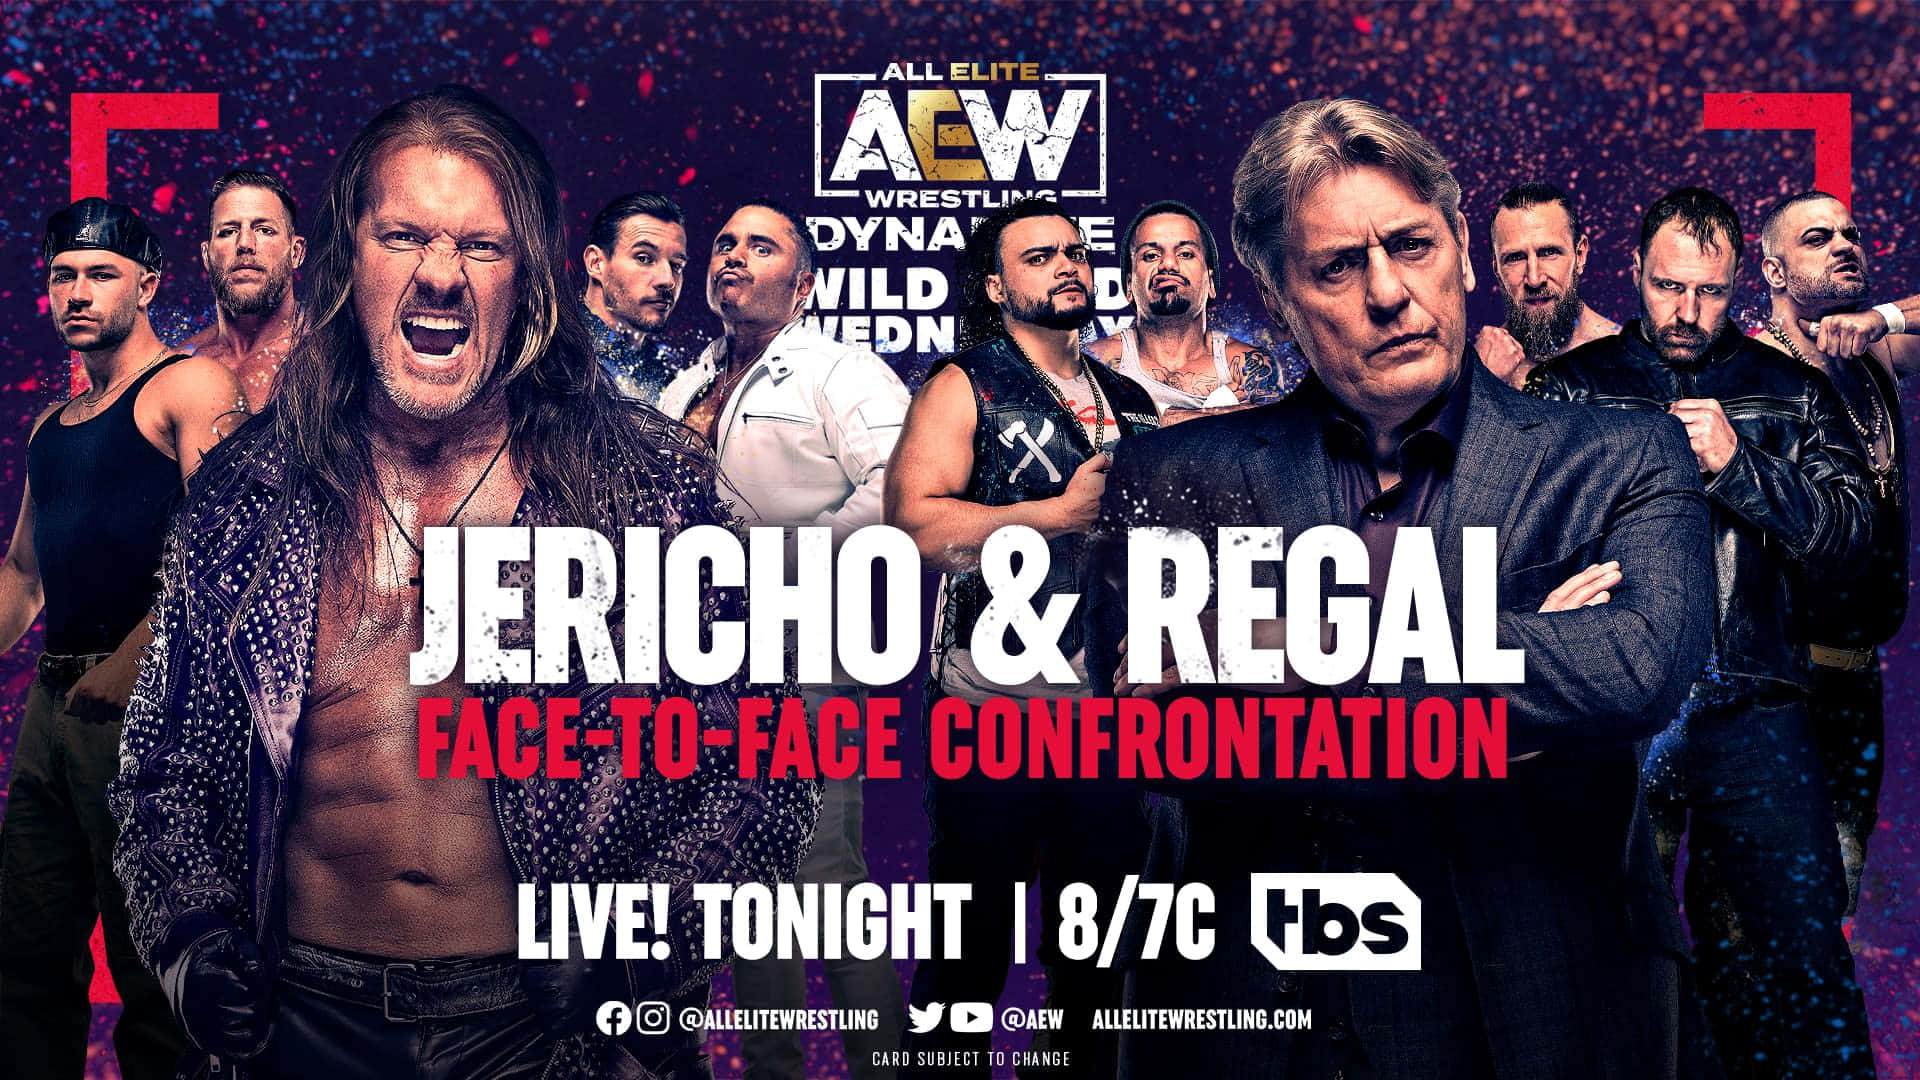 Williamregal Chris Jericho Aew Dynamite: William Regal Chris Jericho Aew Dynamite. (in German, Since These Are Proper Names, They Would Not Be Translated. The Sentence Refers To Potential Options For A Computer Or Mobile Wallpaper Featuring Wrestlers And A Tv Show.) Wallpaper